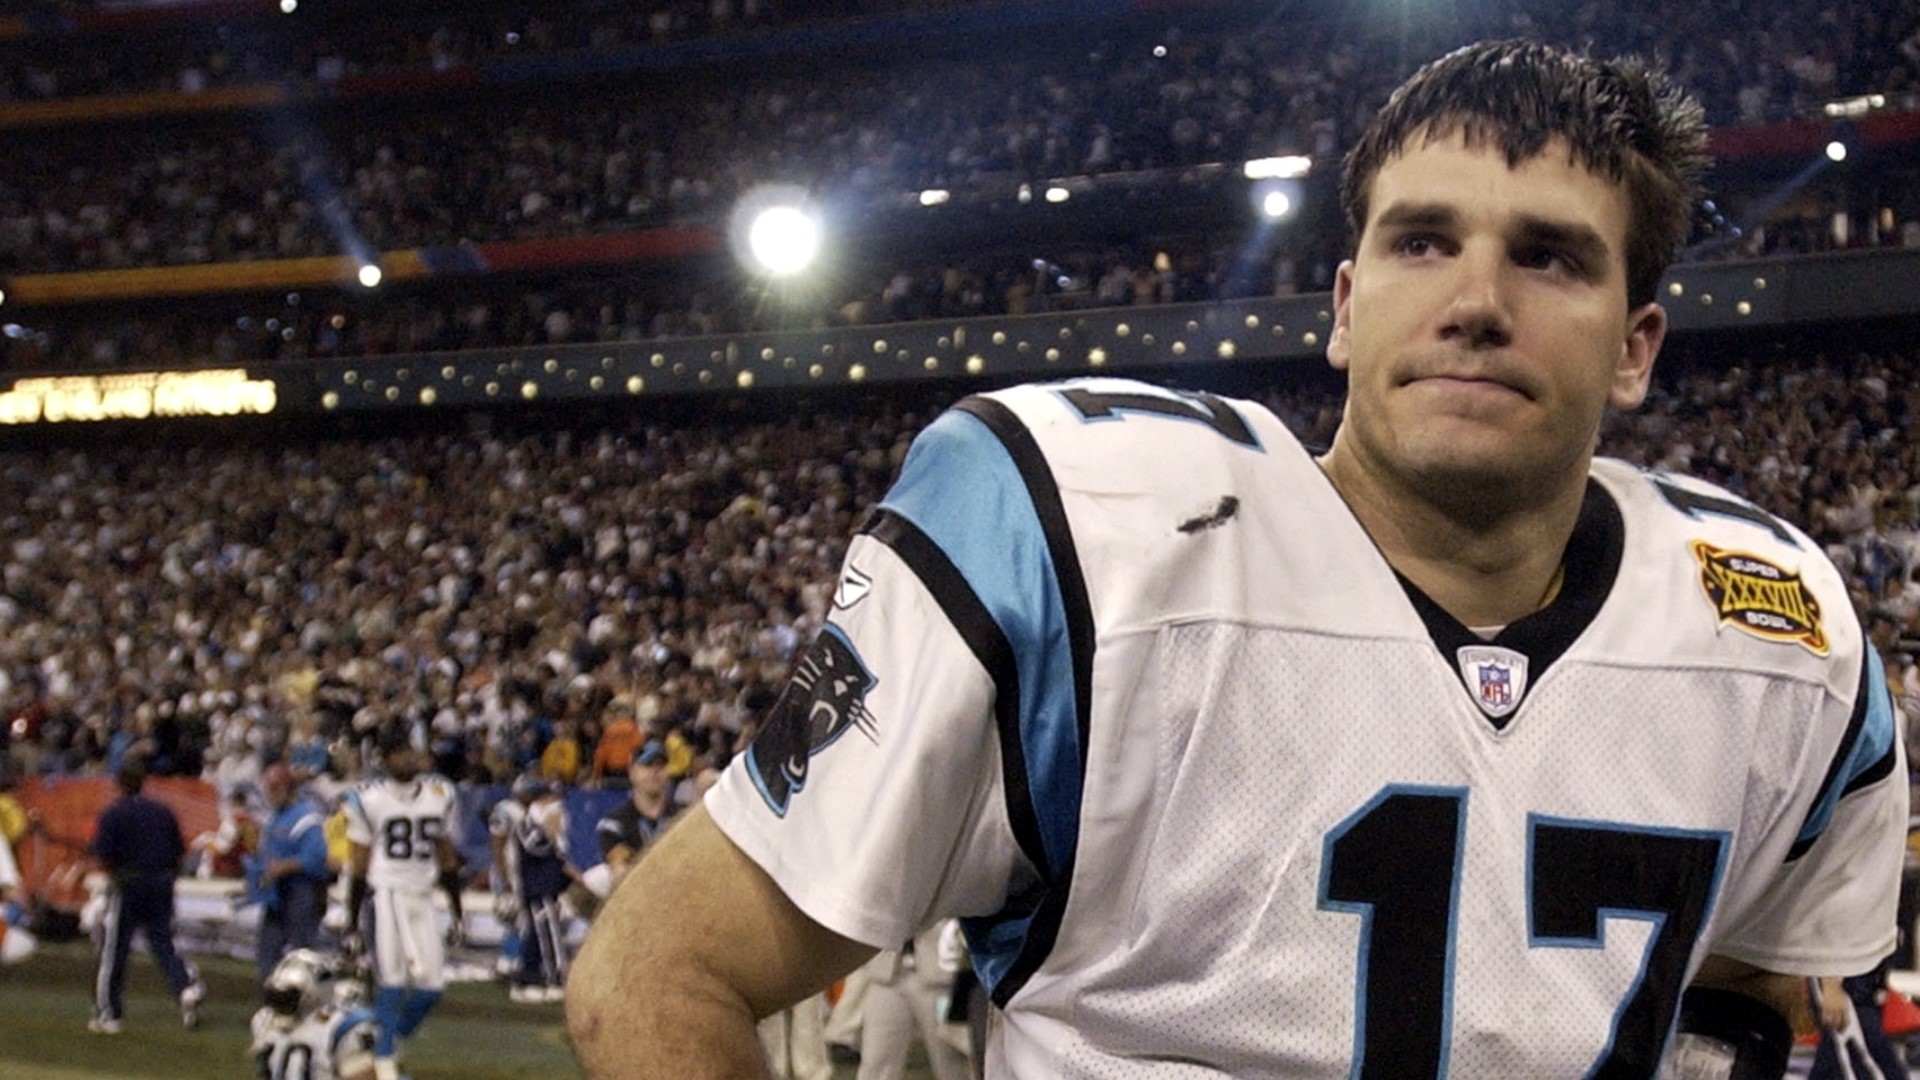 Former Panthers quarterback Jake Delhomme explains how it felt losing the Super Bowl, his memories of Super Bowl 38 and makes a prediction for Super Bowl 56.